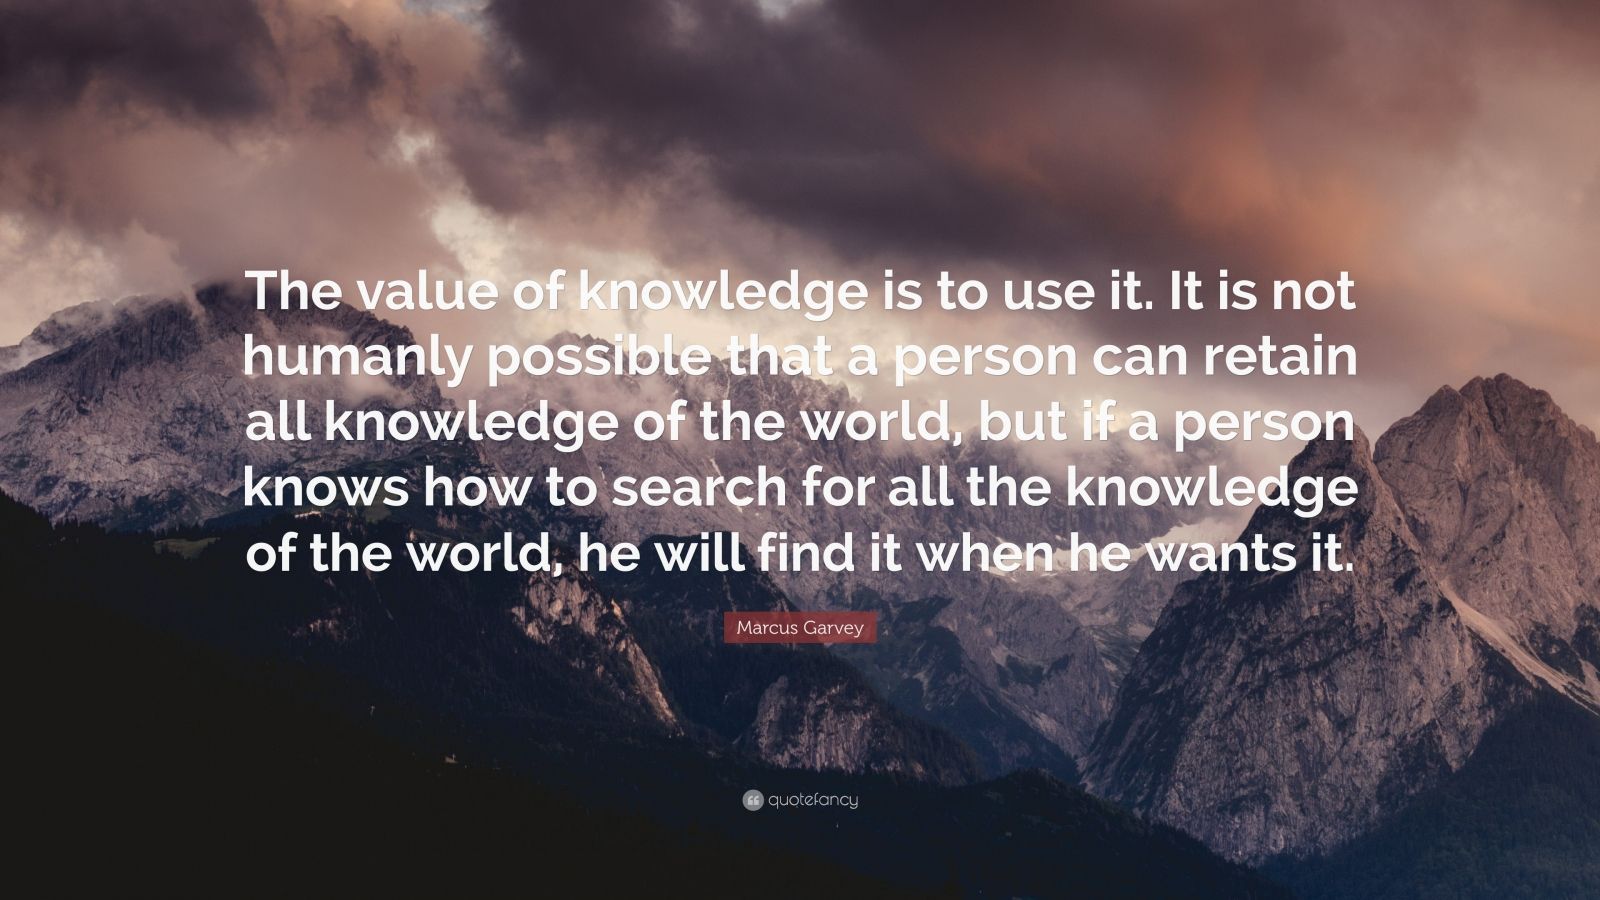 Marcus Garvey Quote: “The value of knowledge is to use it. It is not ...